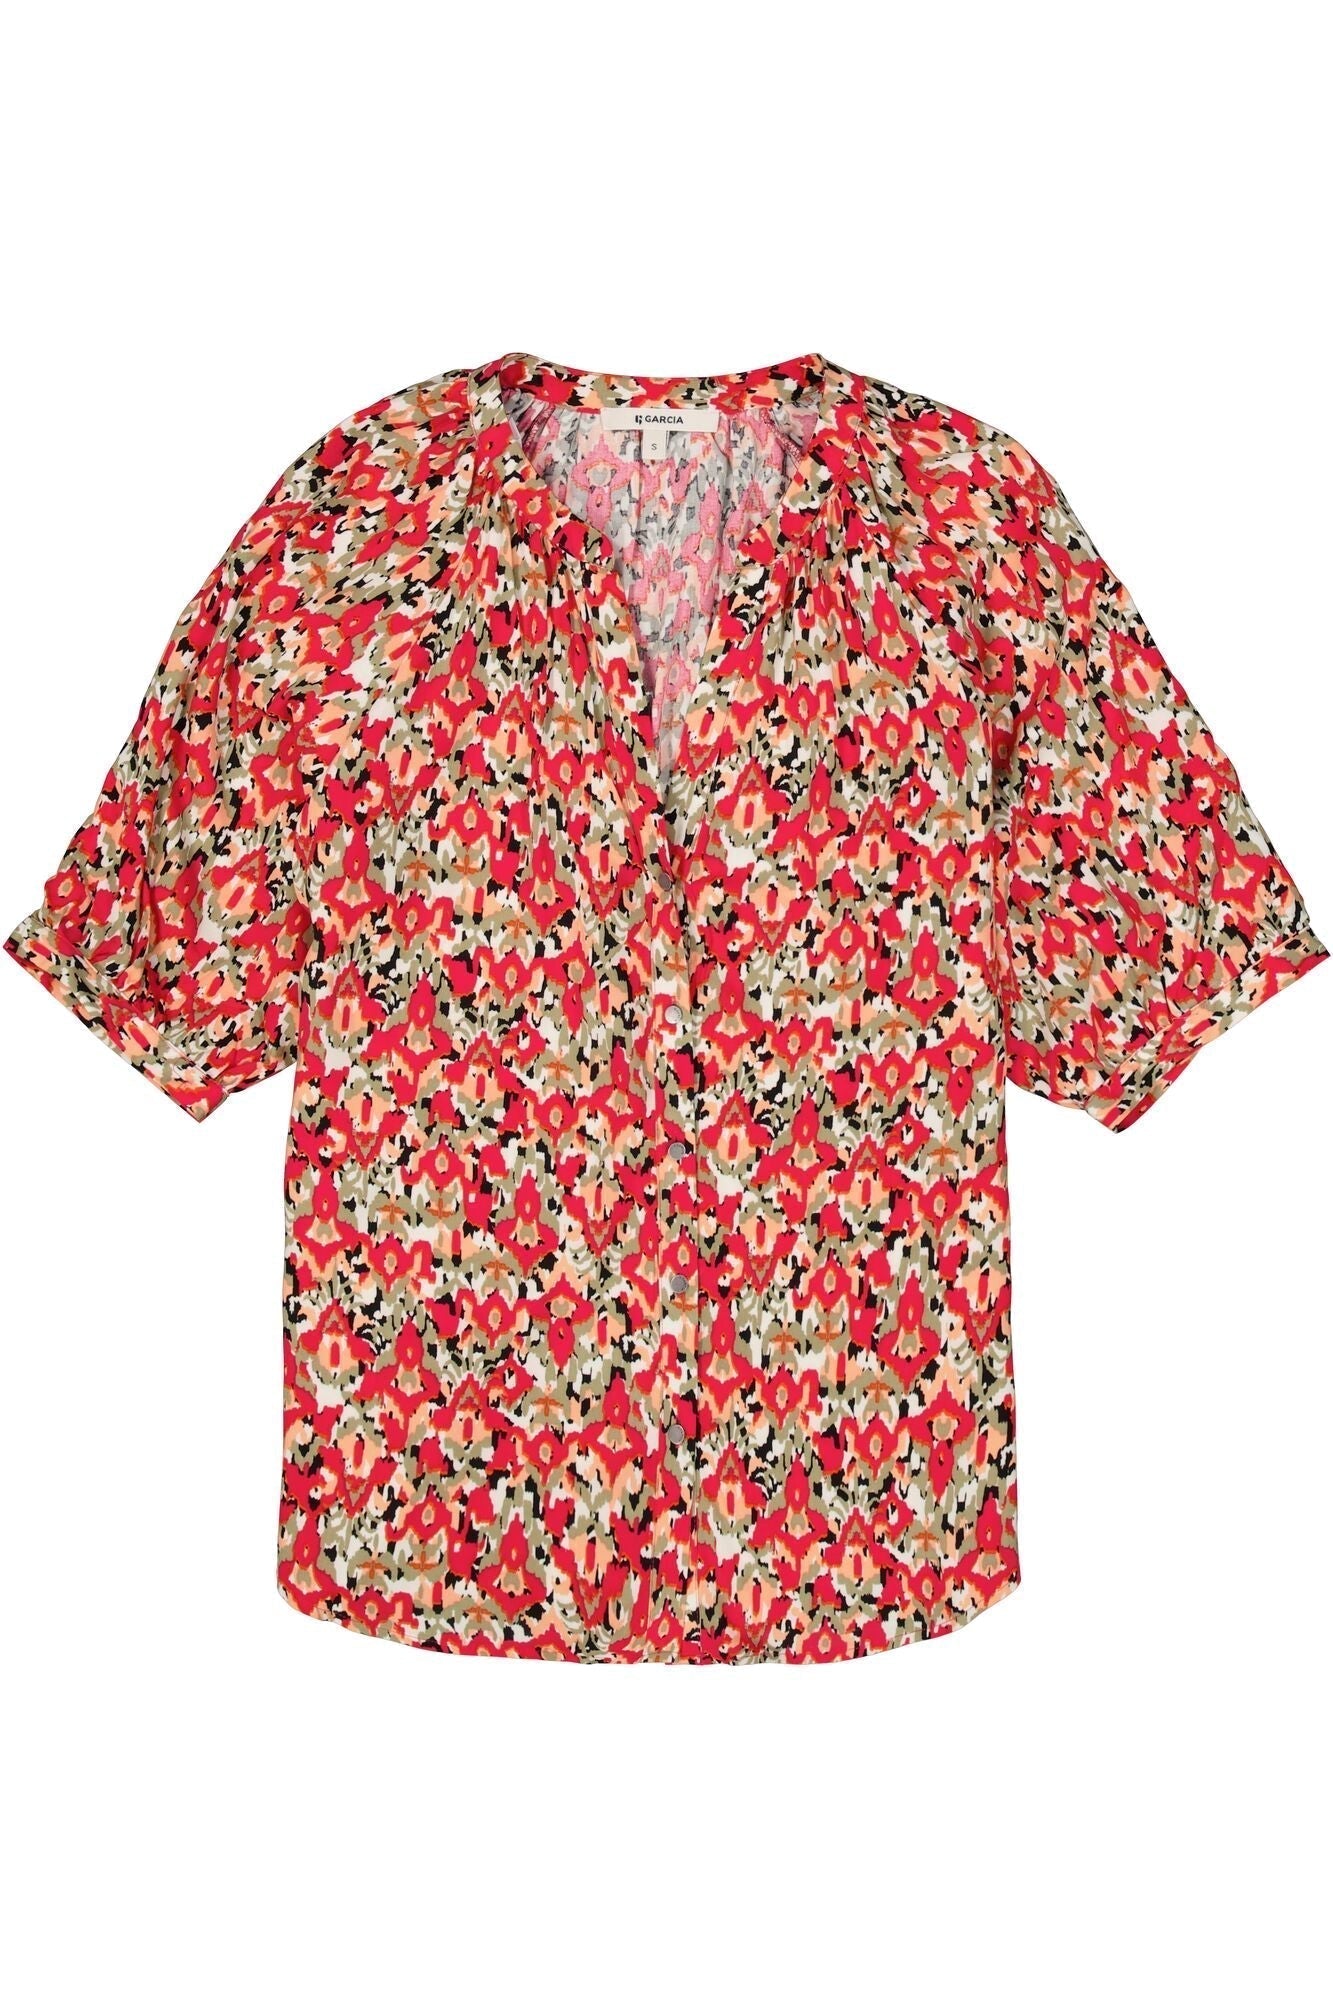 Garcia (O40037) Women's Short Sleeve Button Up Blouse in a Pink Abstract Floral Print